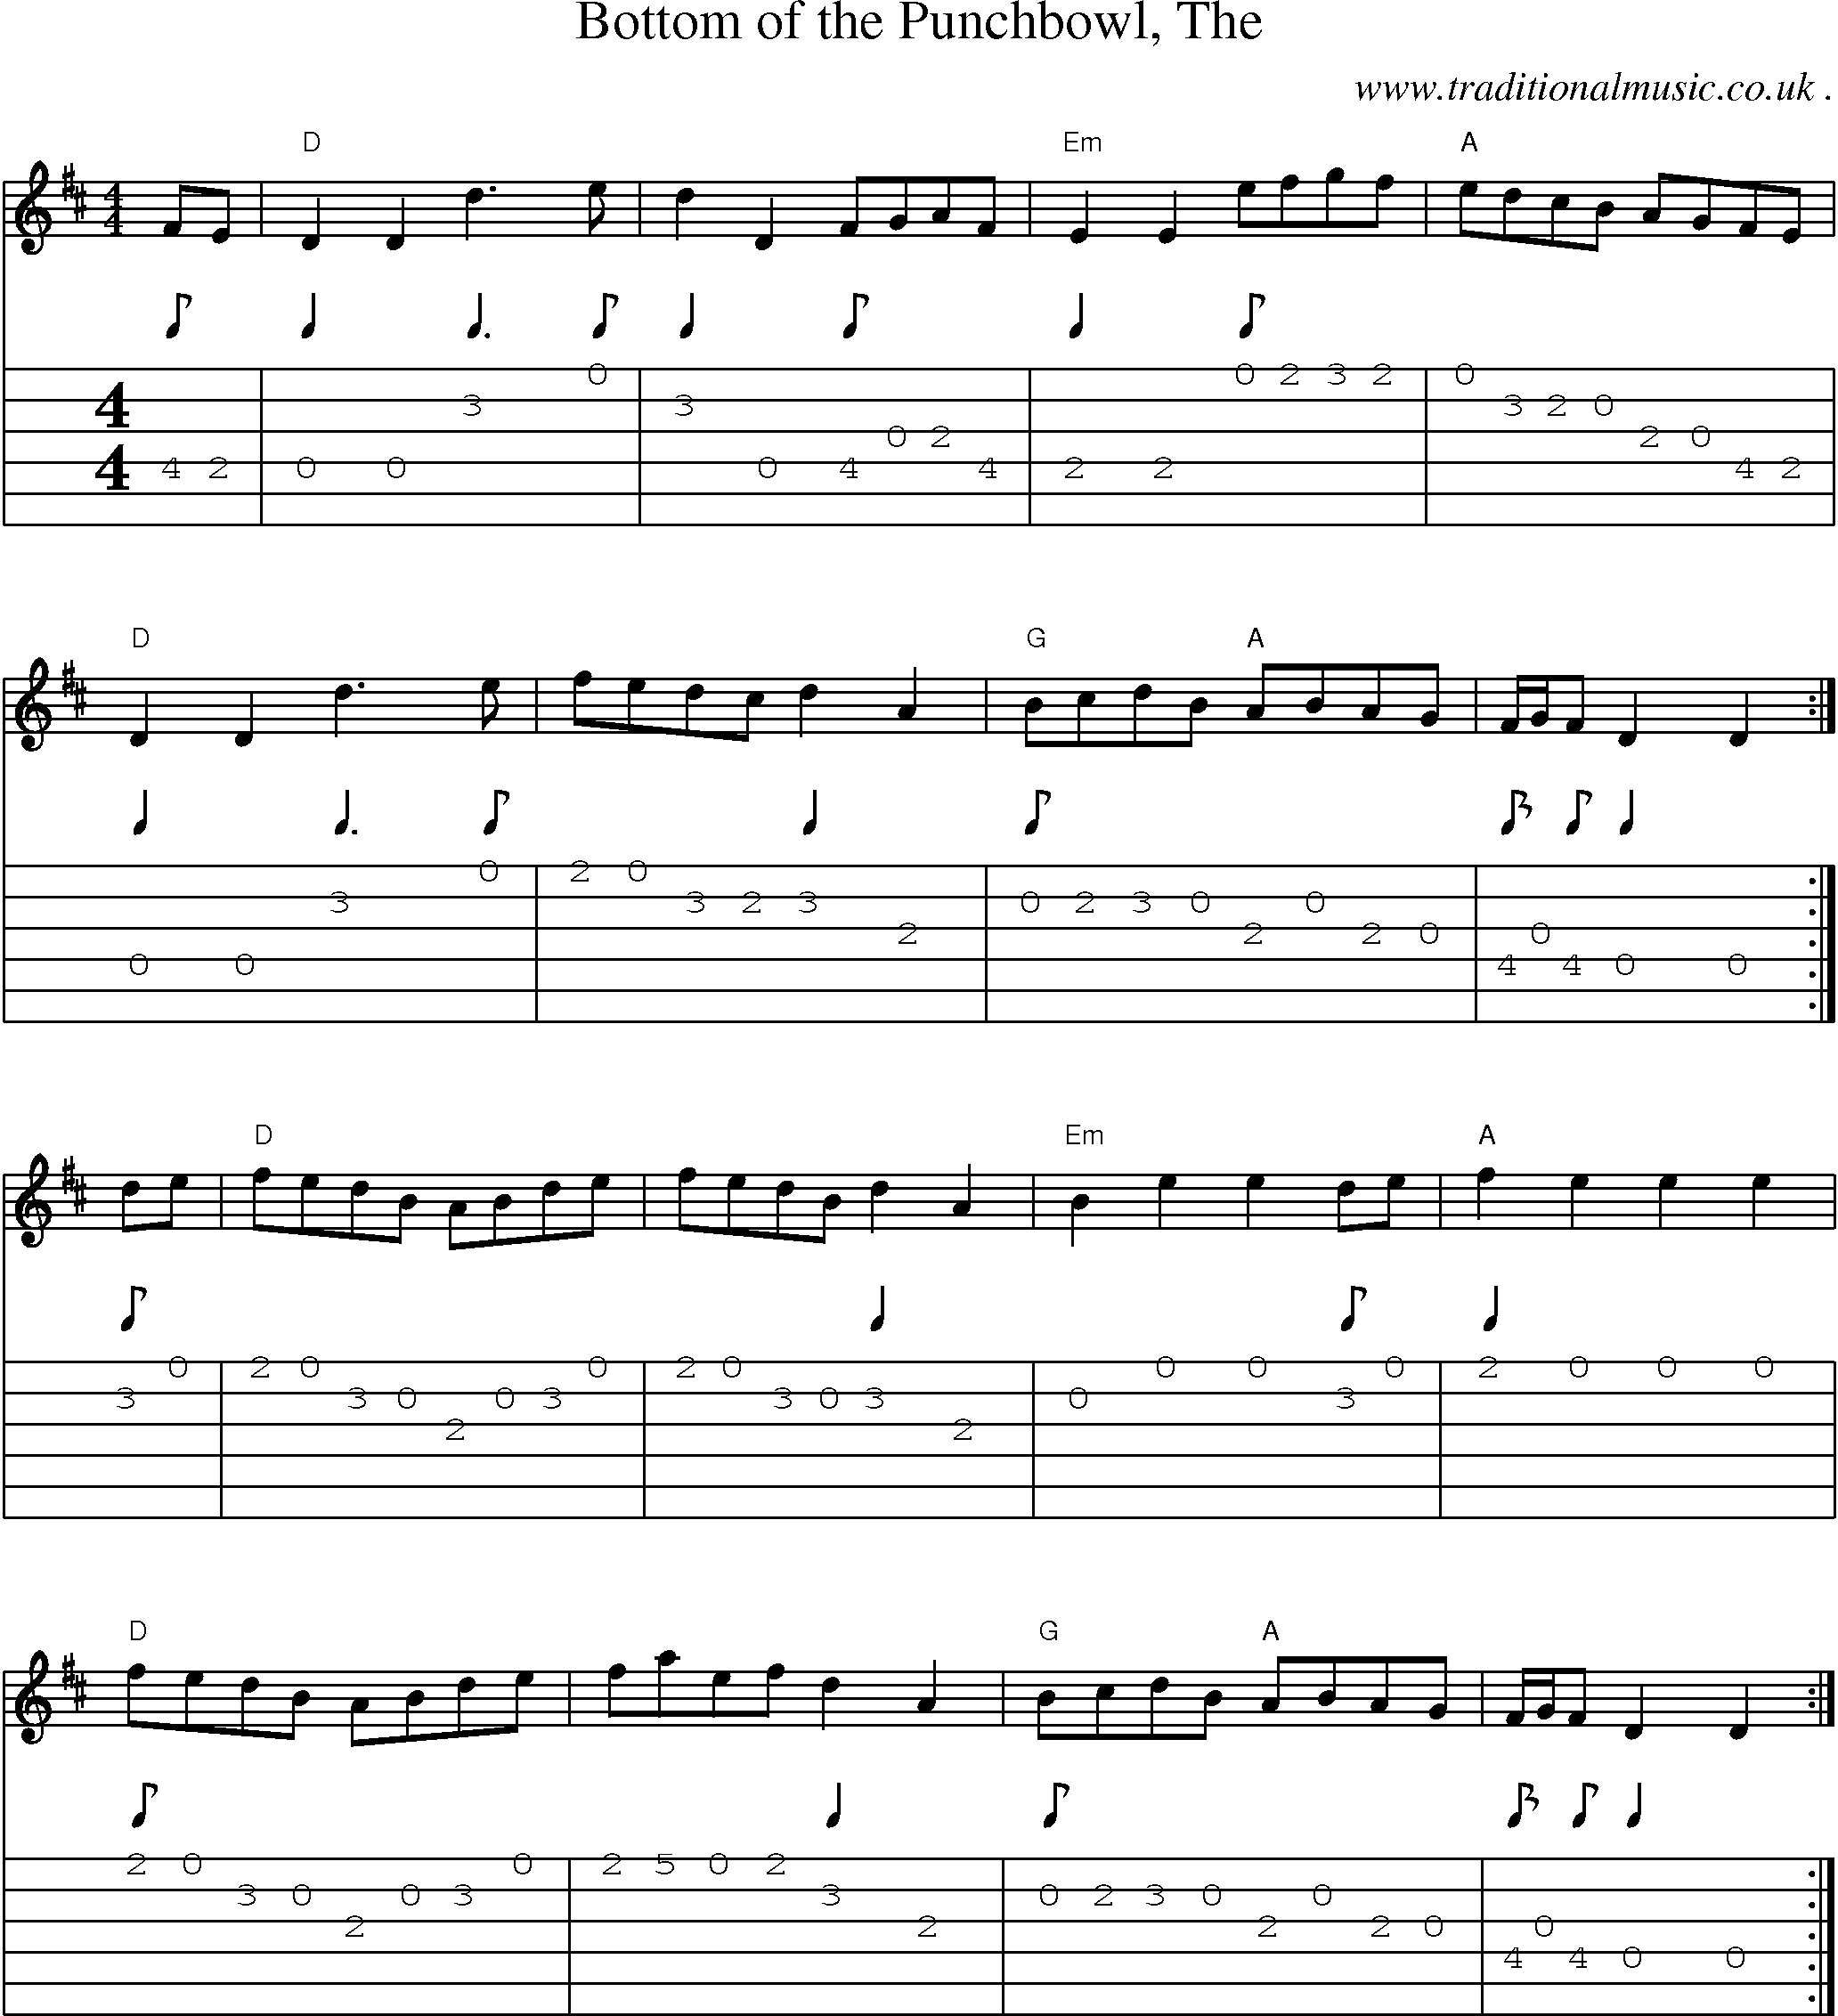 Sheet-music  score, Chords and Guitar Tabs for Bottom Of The Punchbowl The